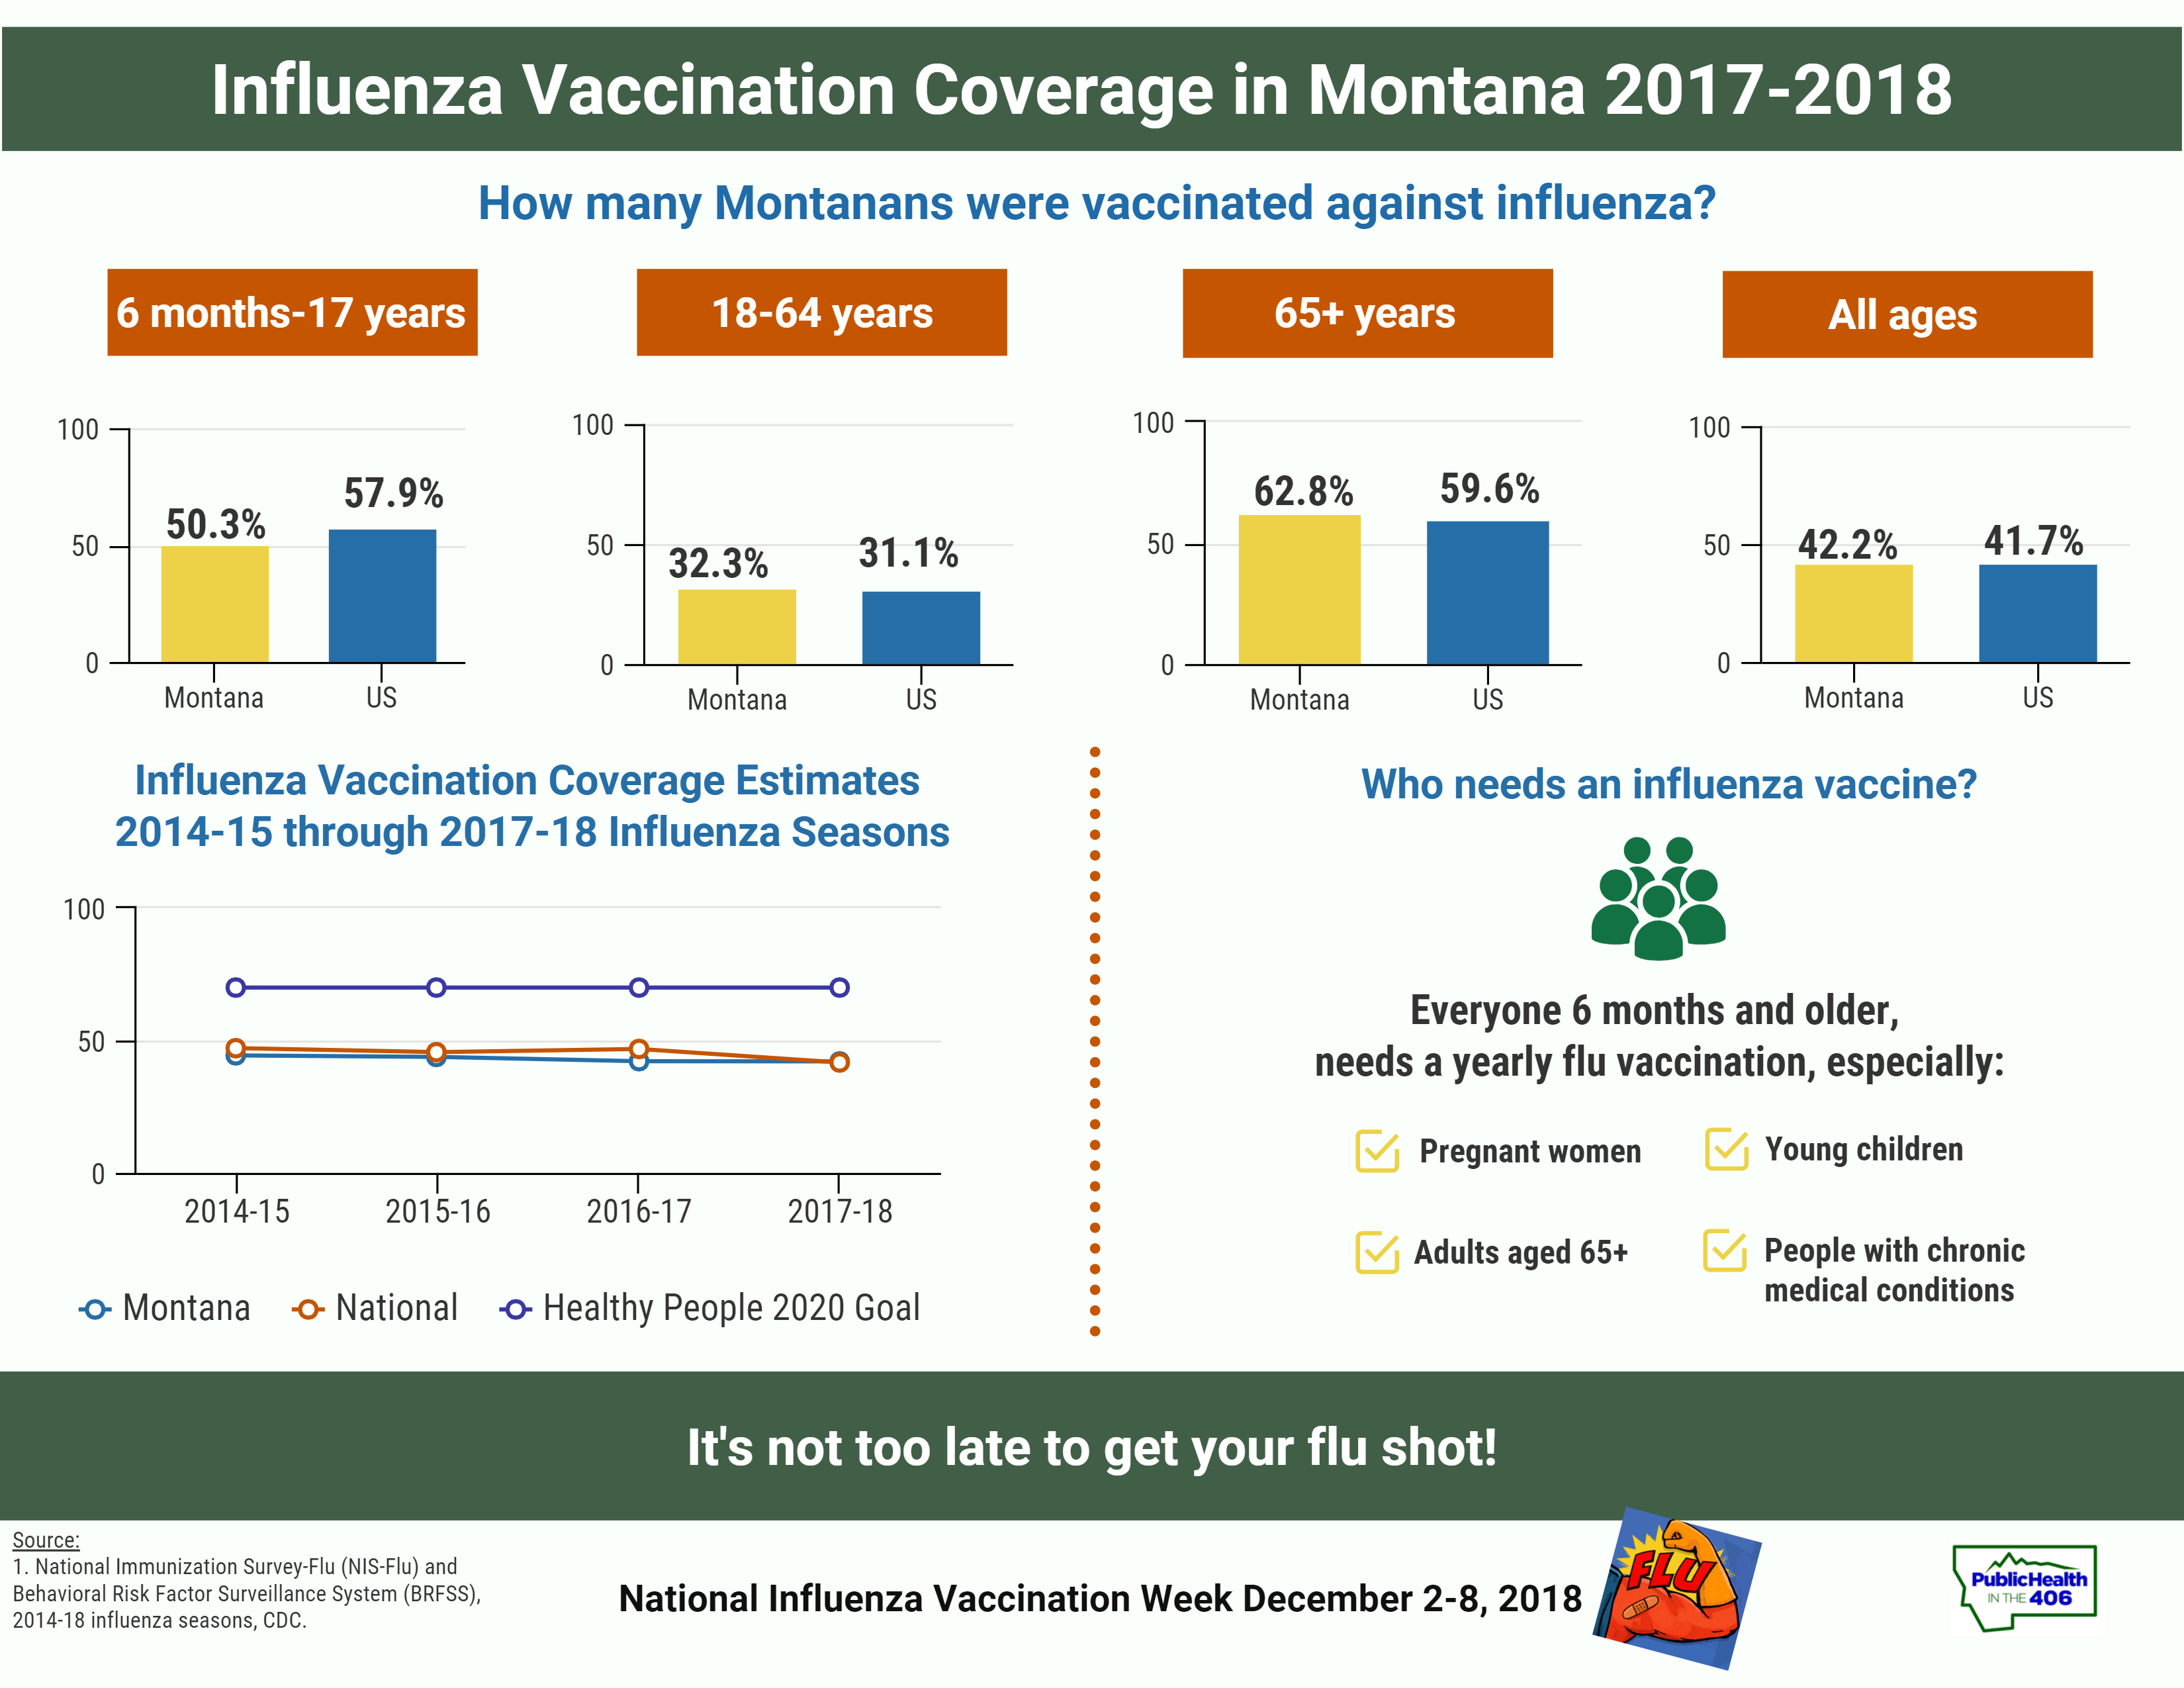 Influenza vaccination coverage in Montana 2017-2018